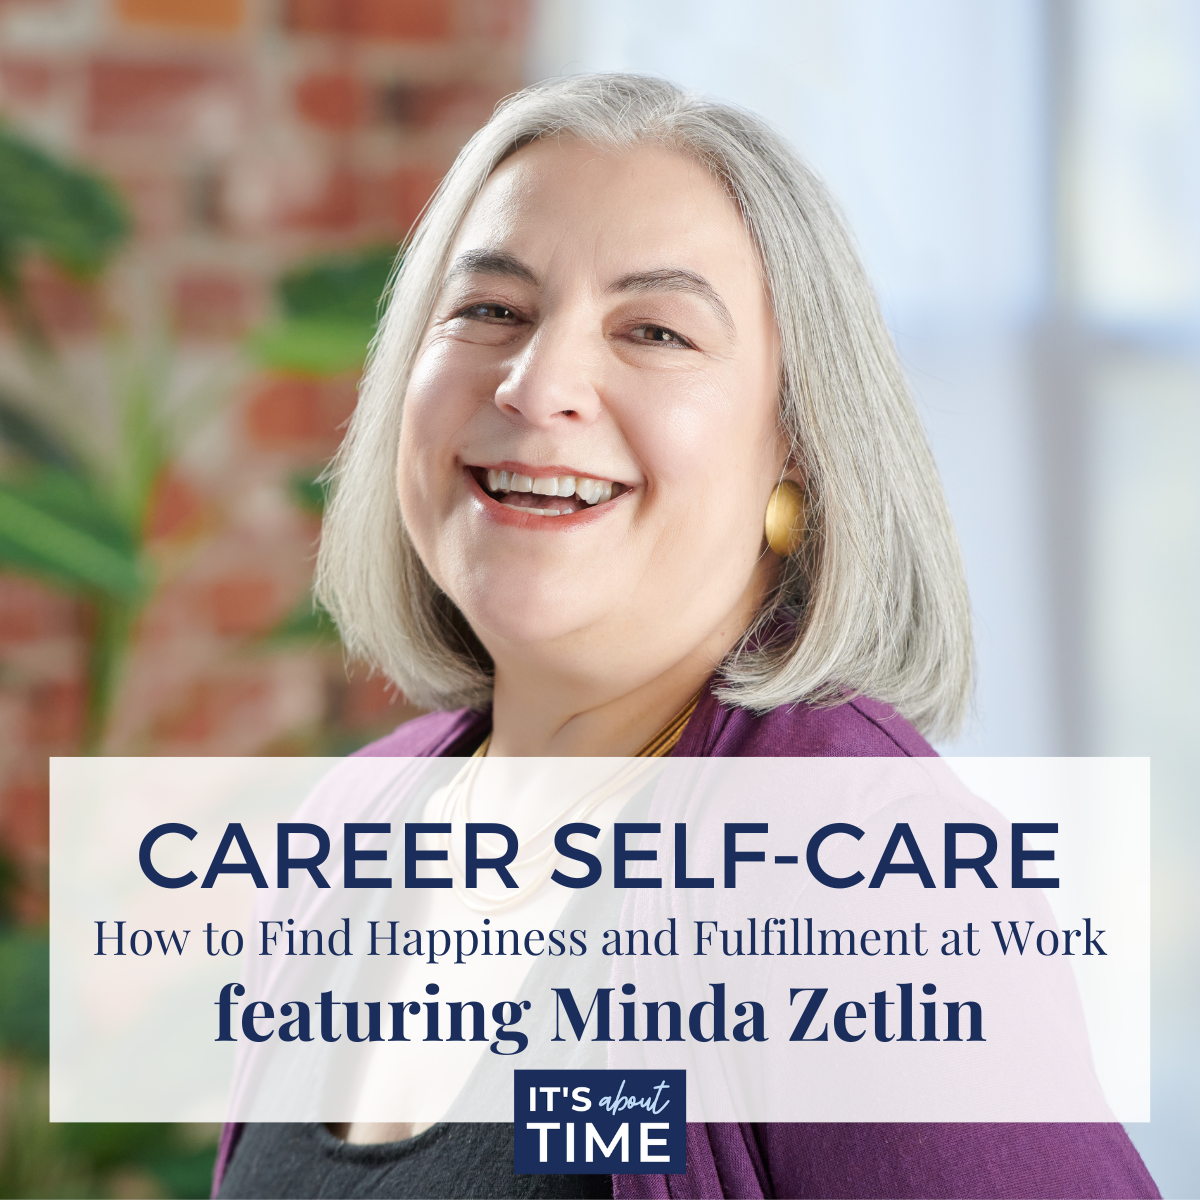 Use career self-care to find happiness and fulfillment at work